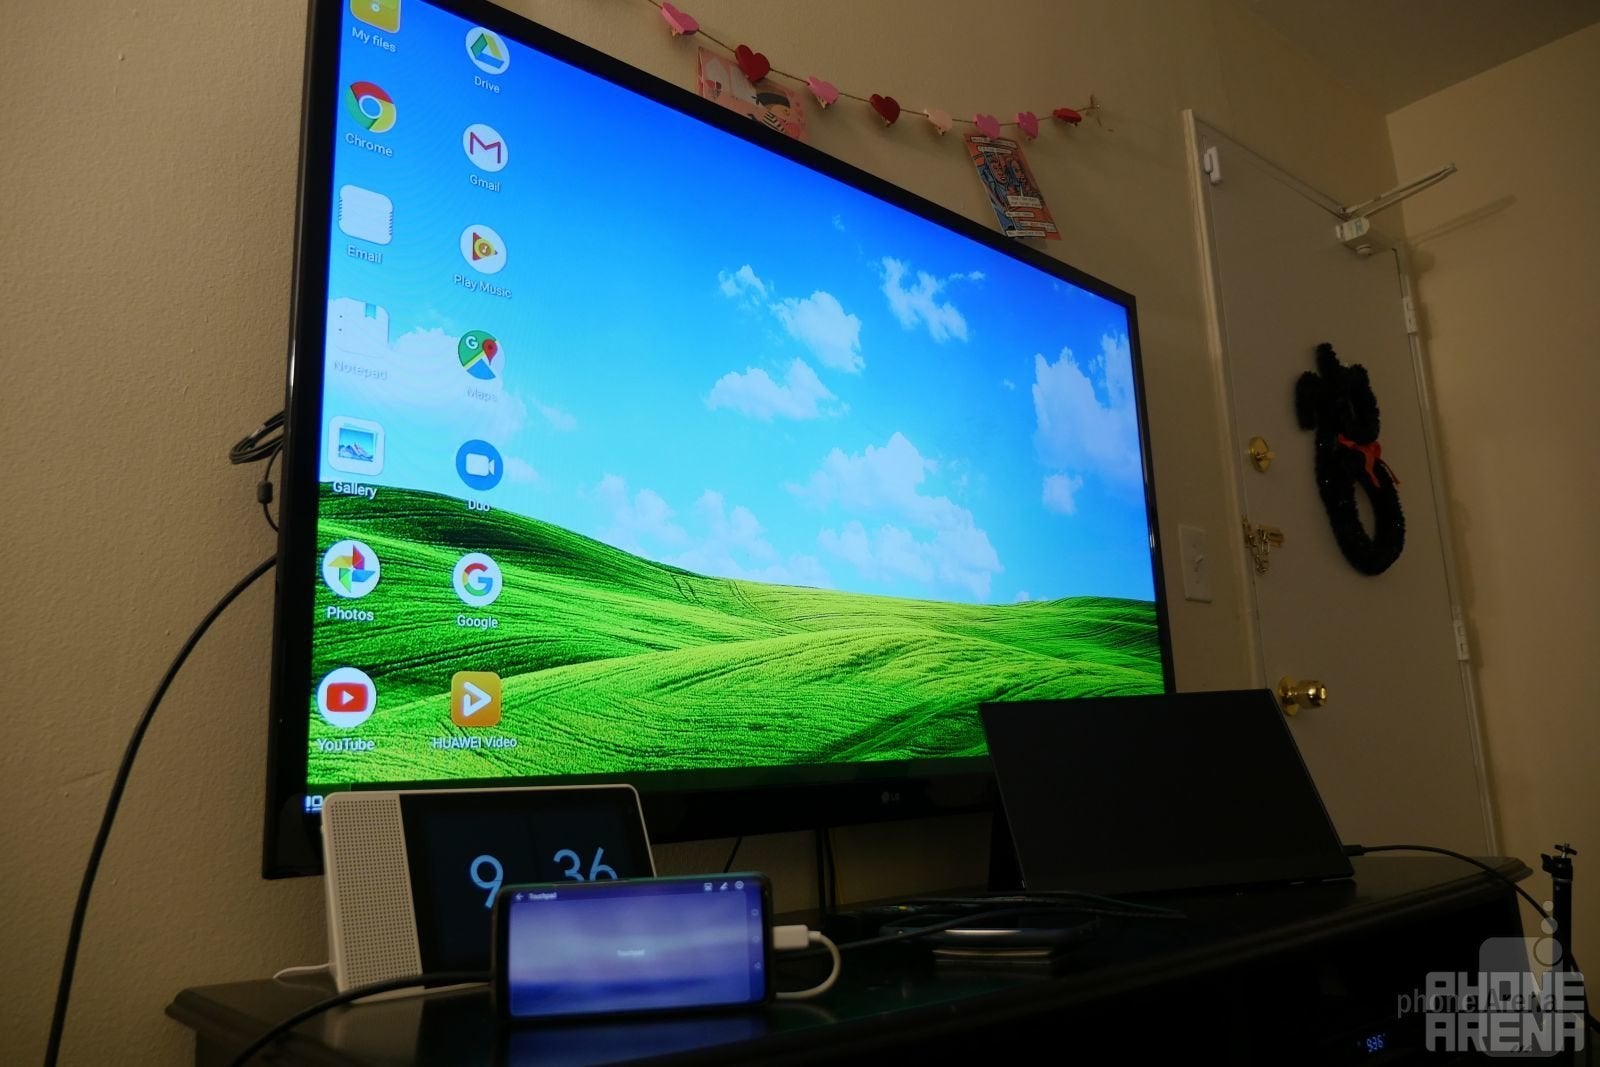 Some smartphones even feature their very own custom desktop experiences, such as the case for some Huawei and Samsung smartphones. Shown here is the Huawei Mate 20 Pro and its EMUI 9.0 Desktop Mode. - How to quickly turn your smartphone into a desktop PC